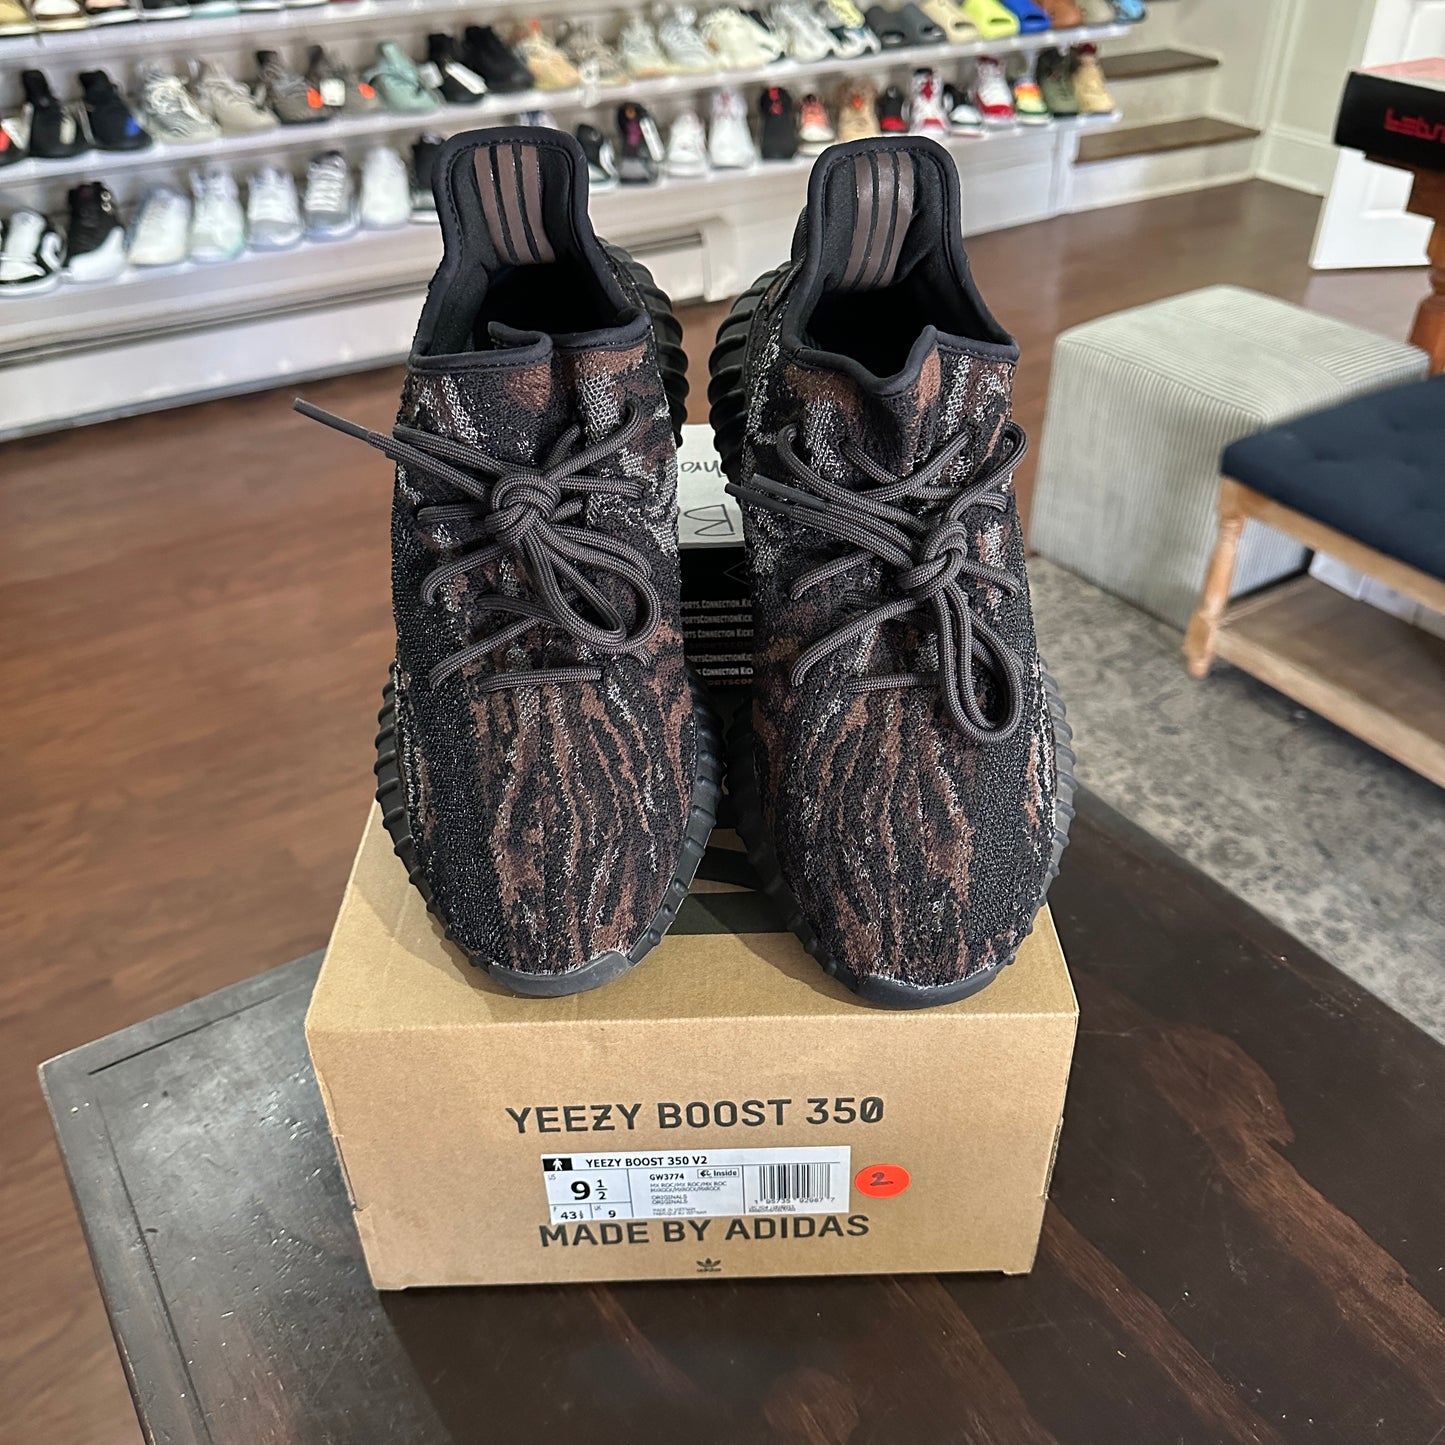 *USED* Yeezy Boost 350 v2 MX Rock (size 9.5)